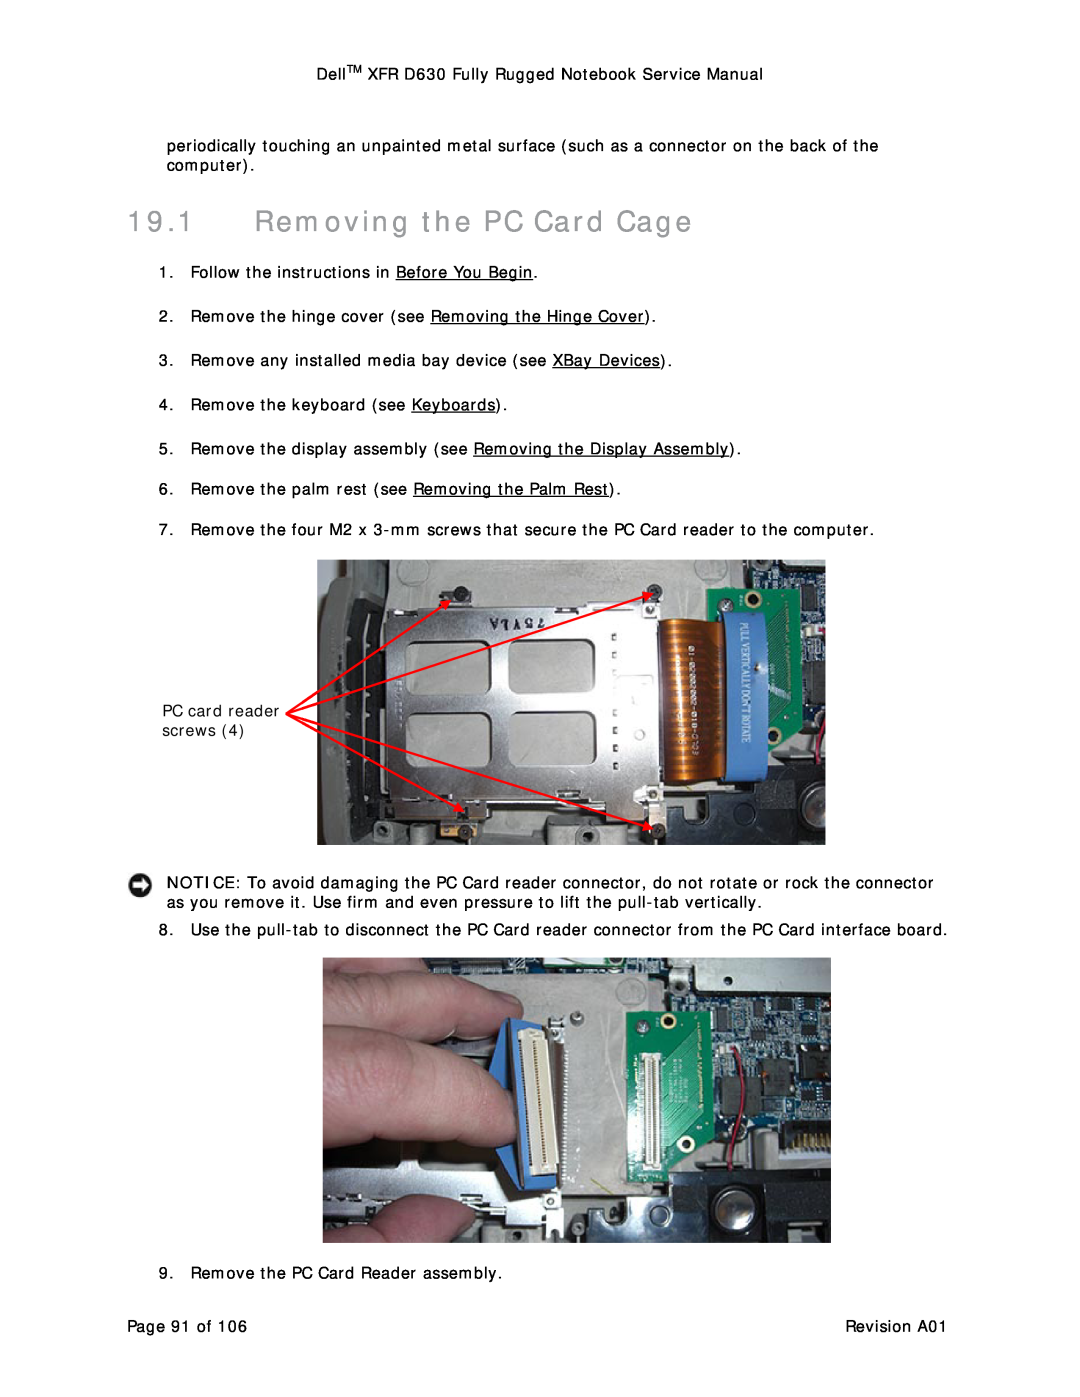 Dell D630 service manual Removing the PC Card Cage 